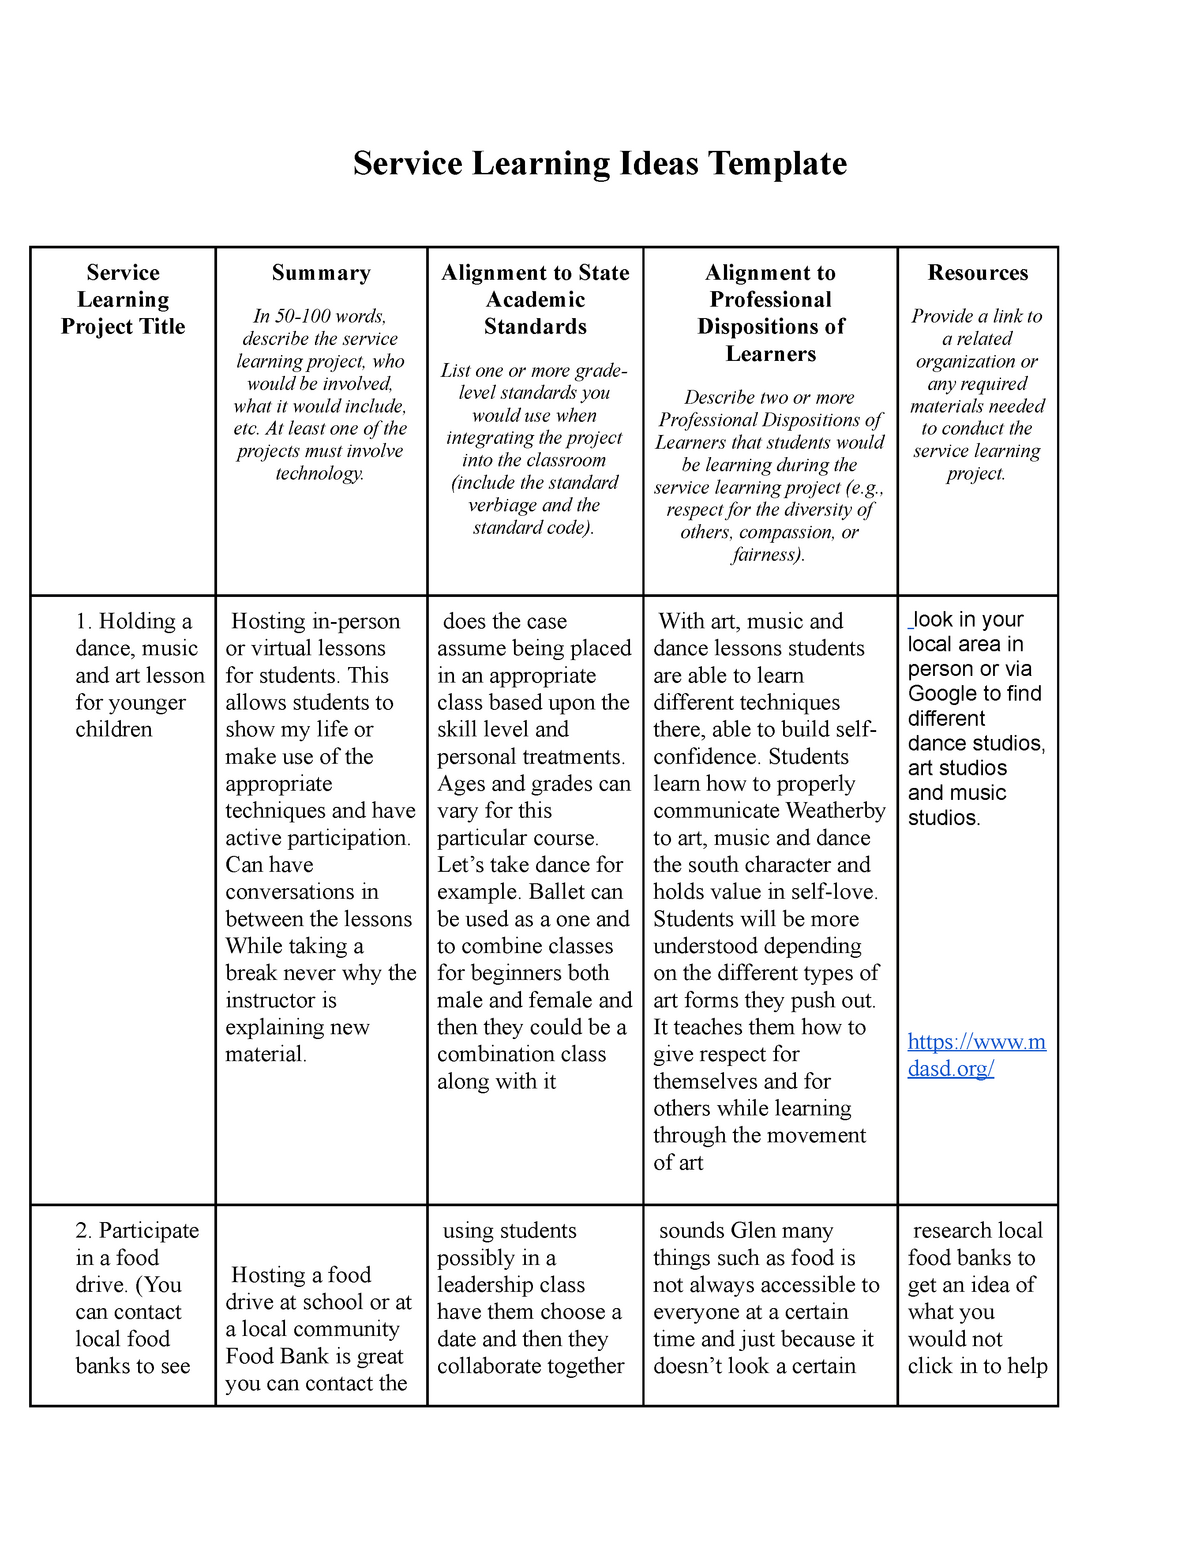 Service Learning Ideas Template Service Learning Ideas Template